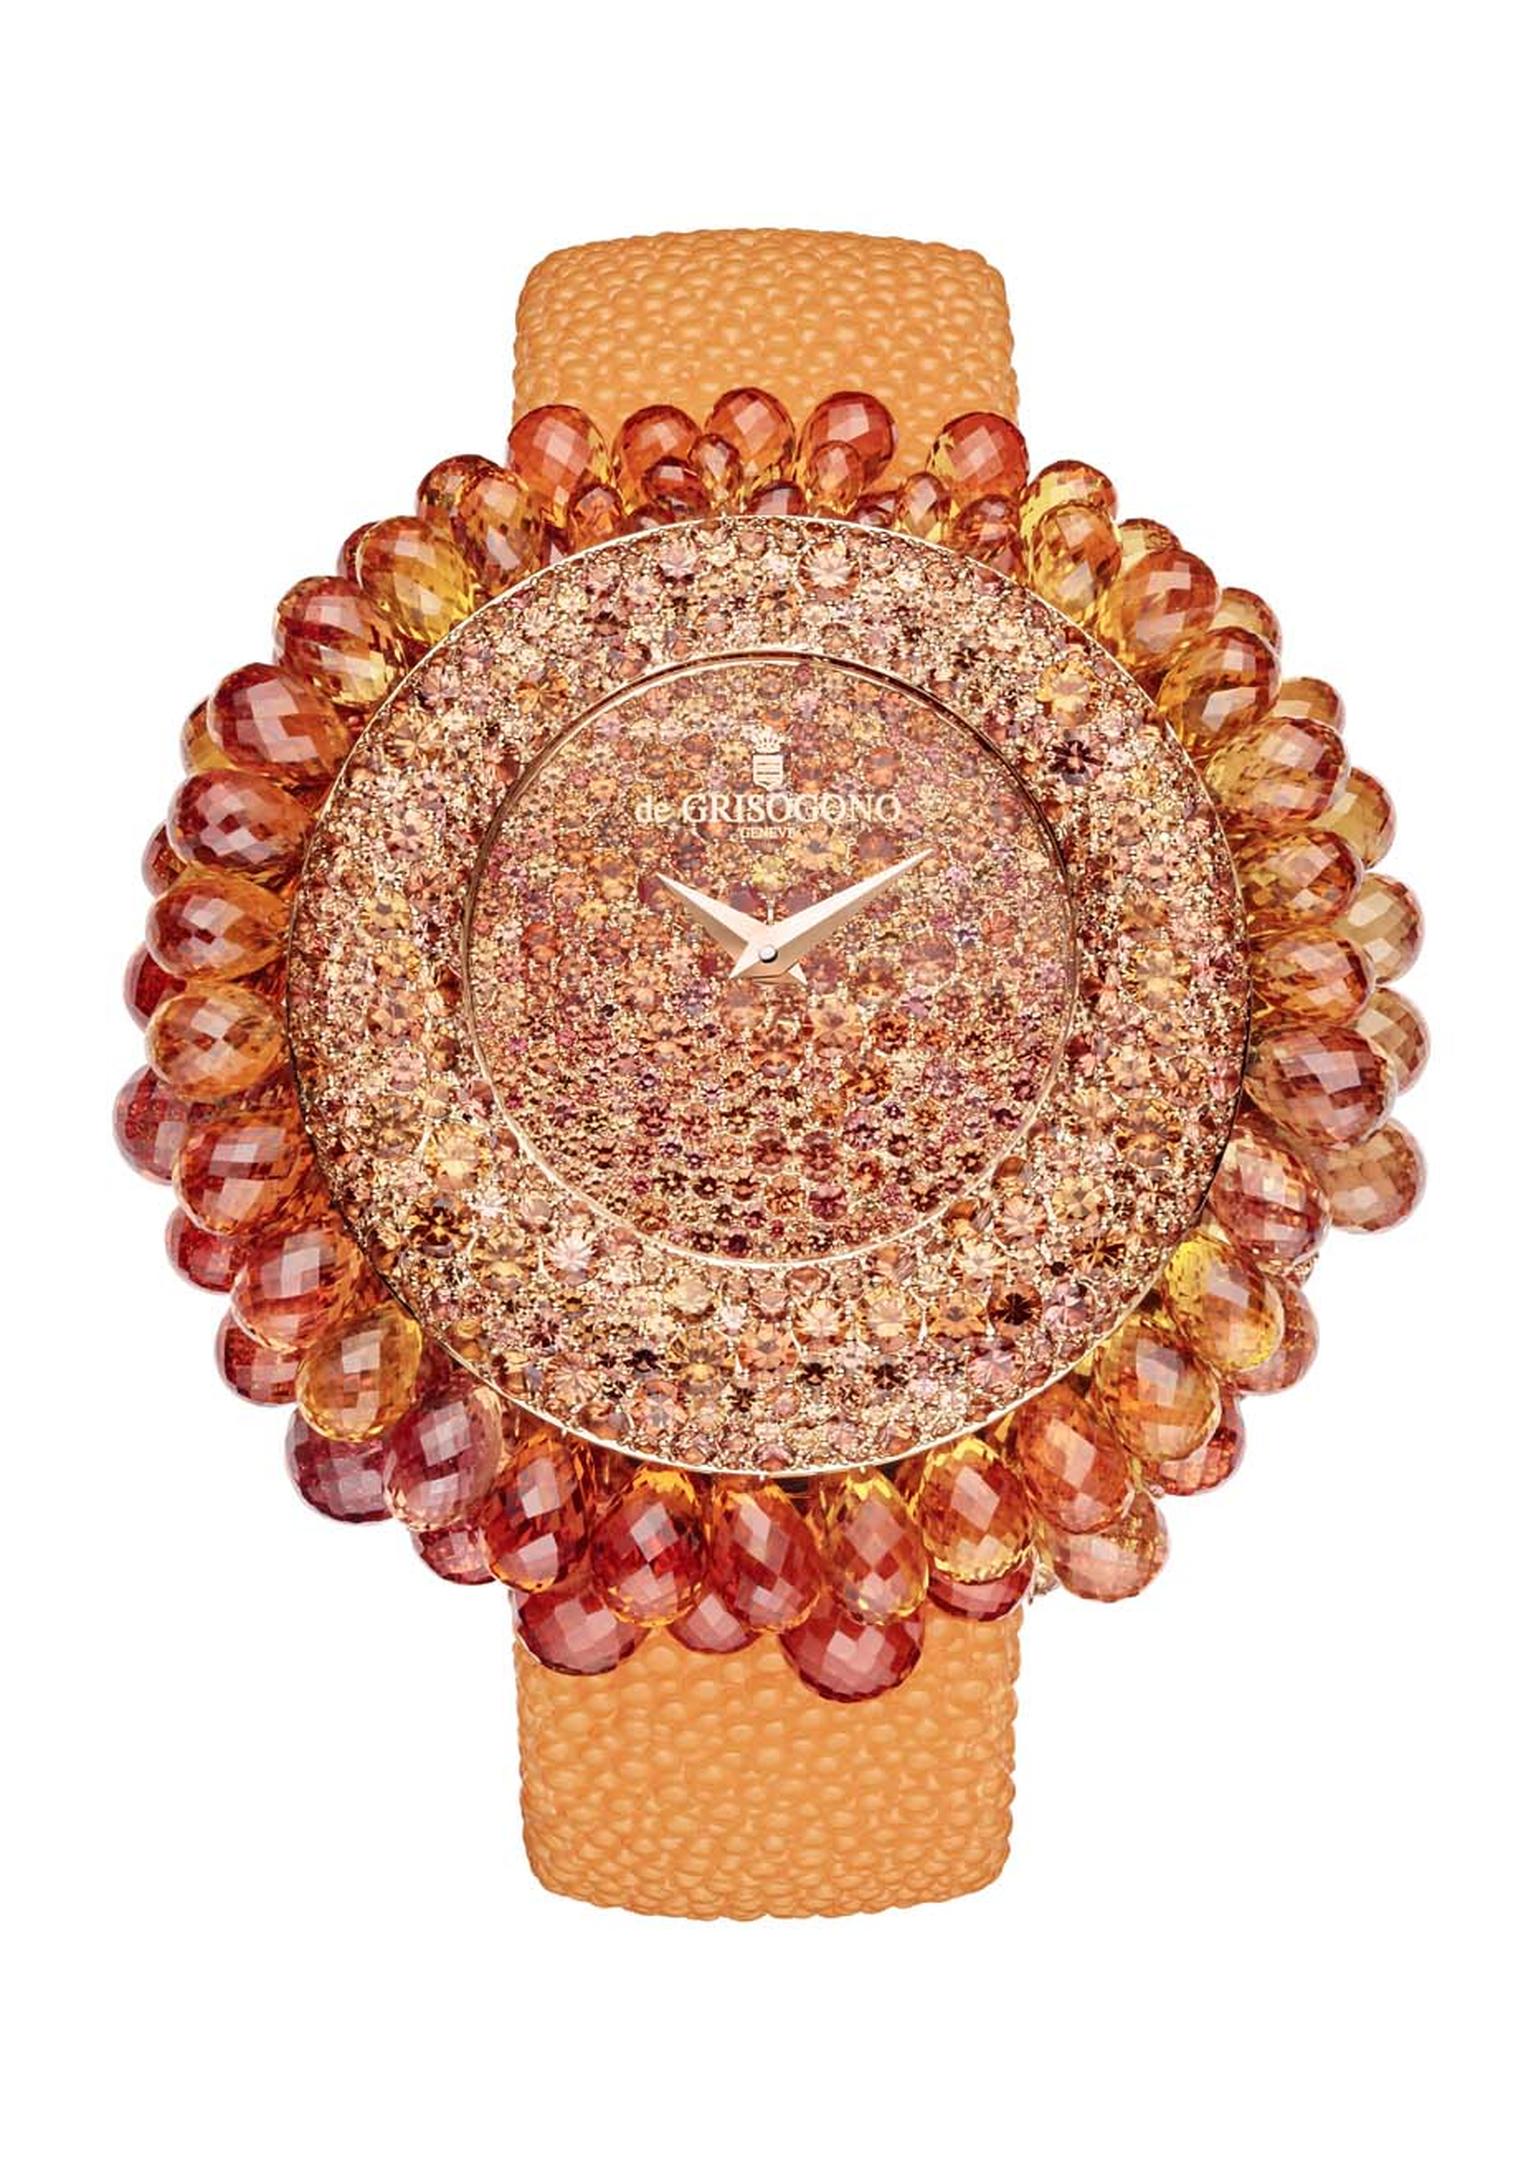 de GRISOGONO's Grappoli watch is the fruit of expert gem-setters and stone cutters. A total of 120 hours is spent on each de GRISOGONO Grappoli masterpiece.